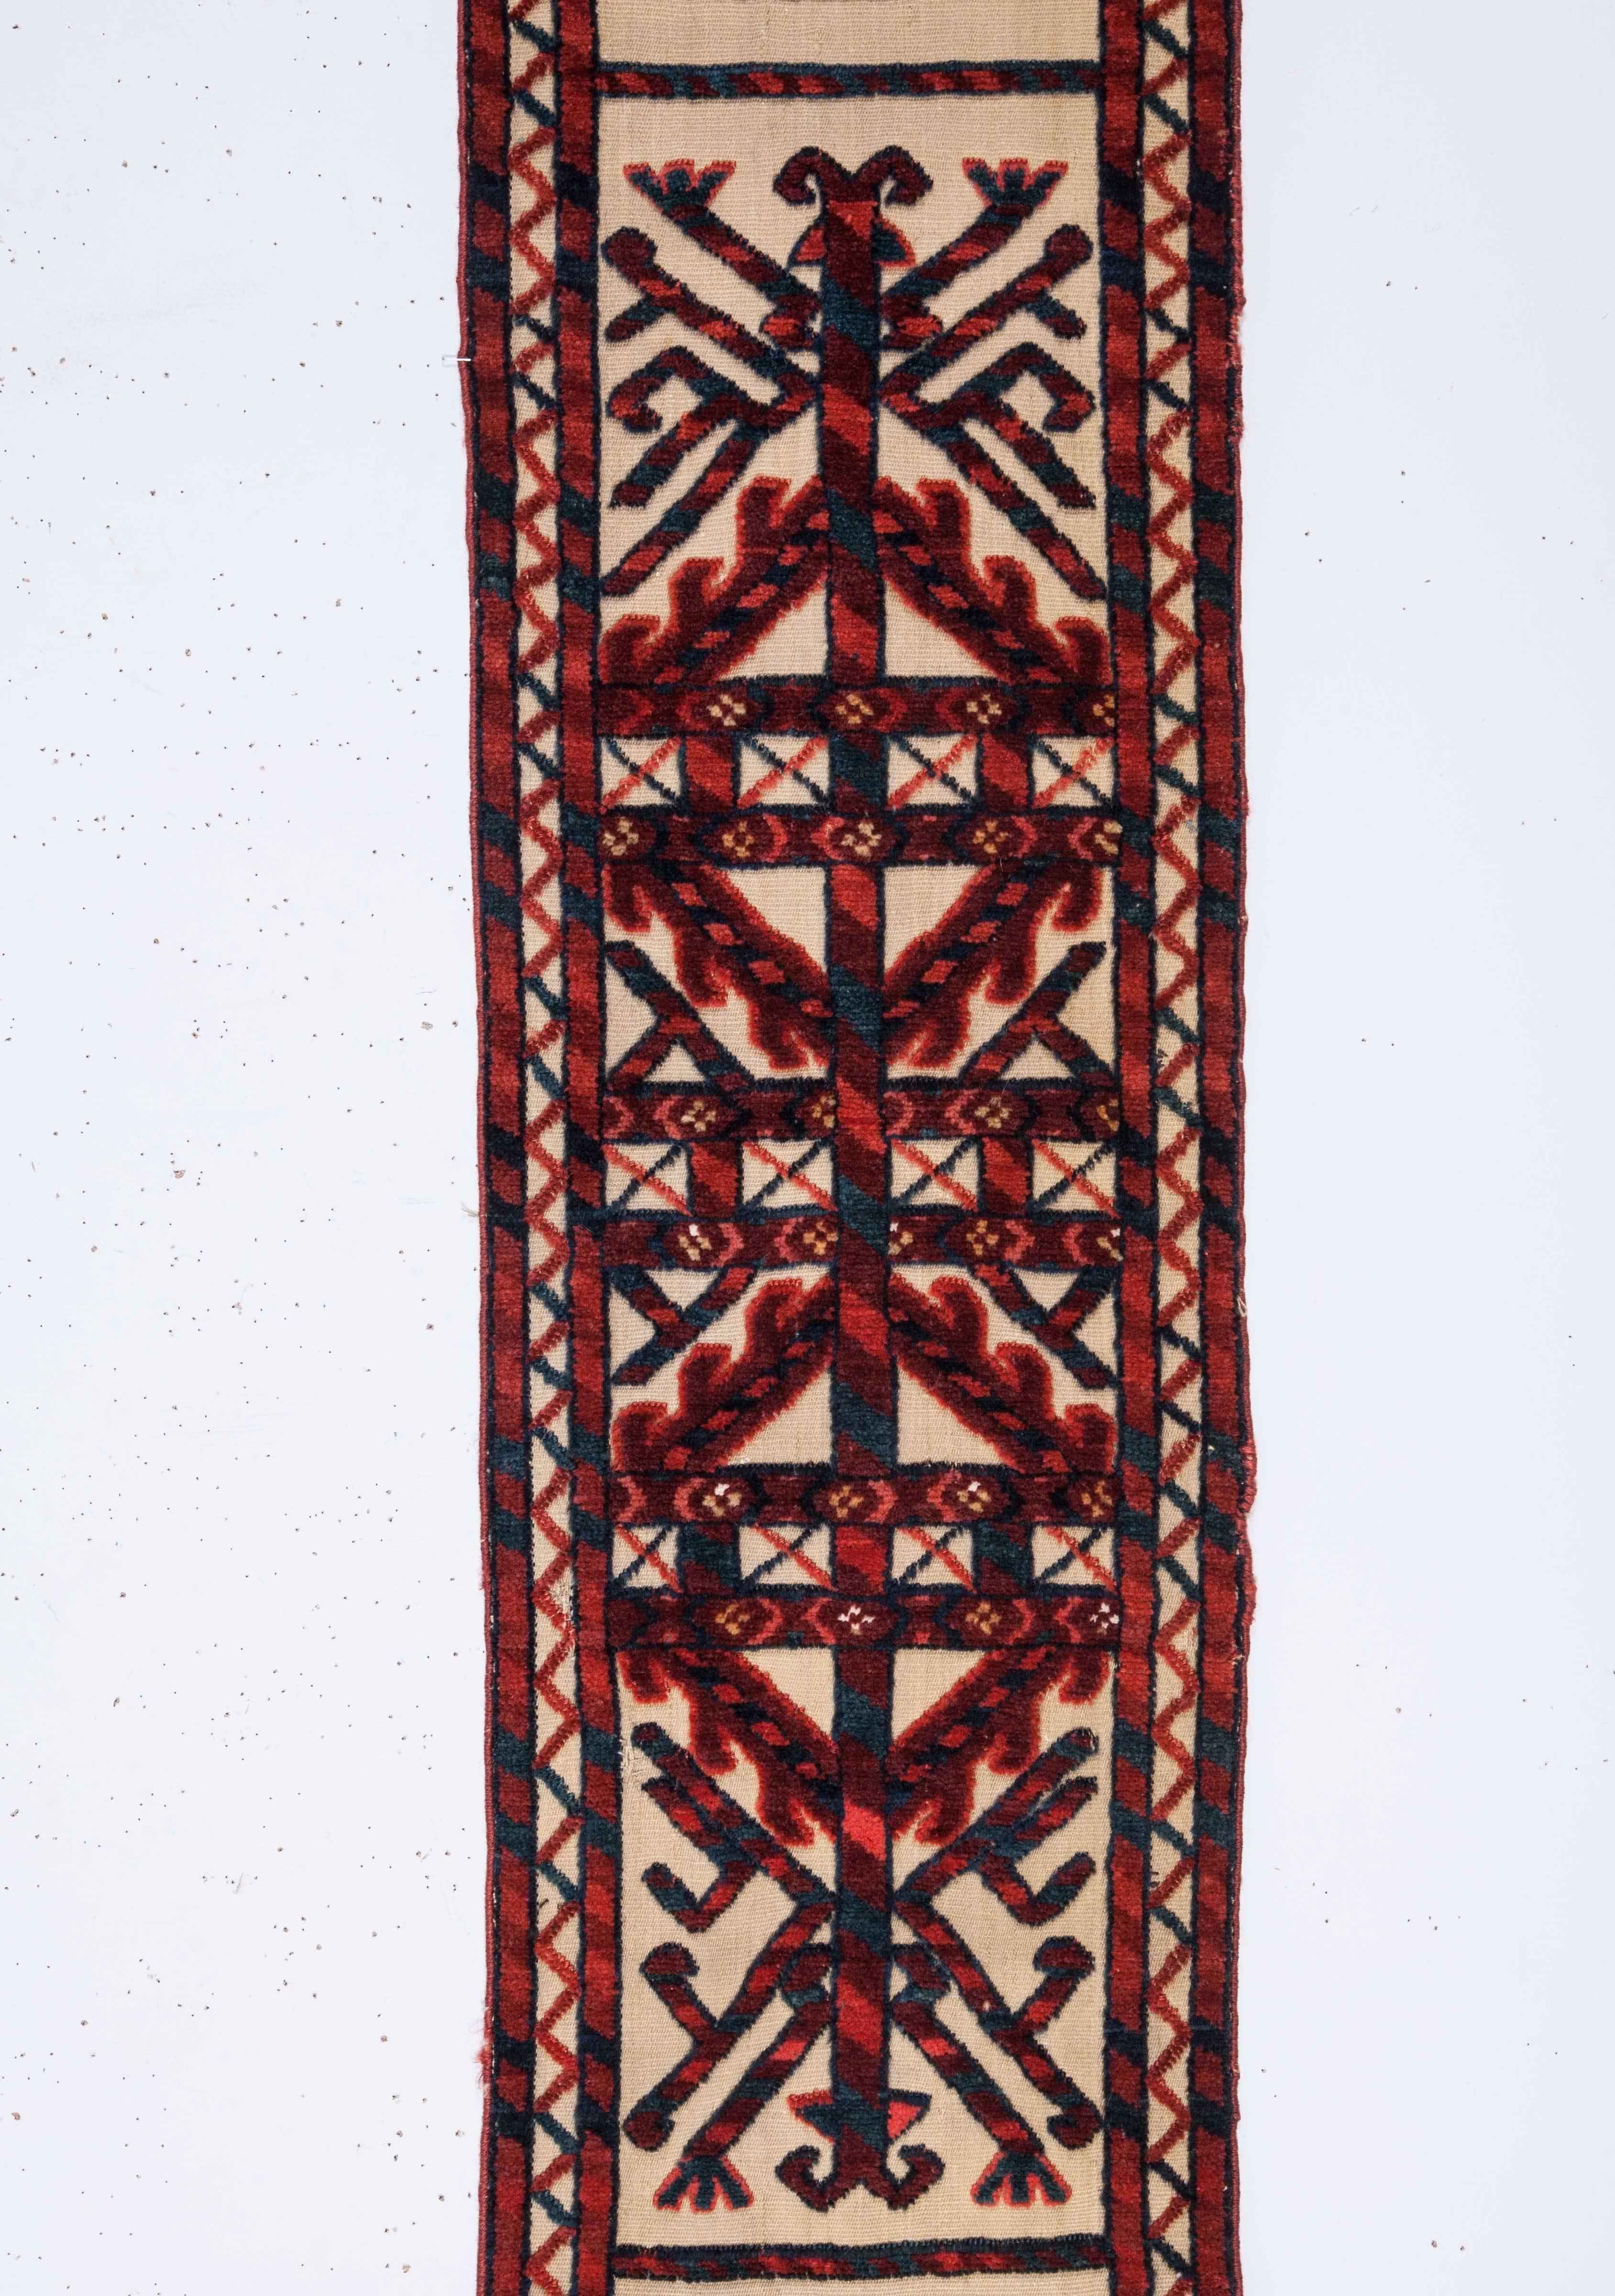 Hand-Woven Mid-19th Century Turkmen Tekke Tribe Tent Band Fragment Wt Great Colors and Wool For Sale